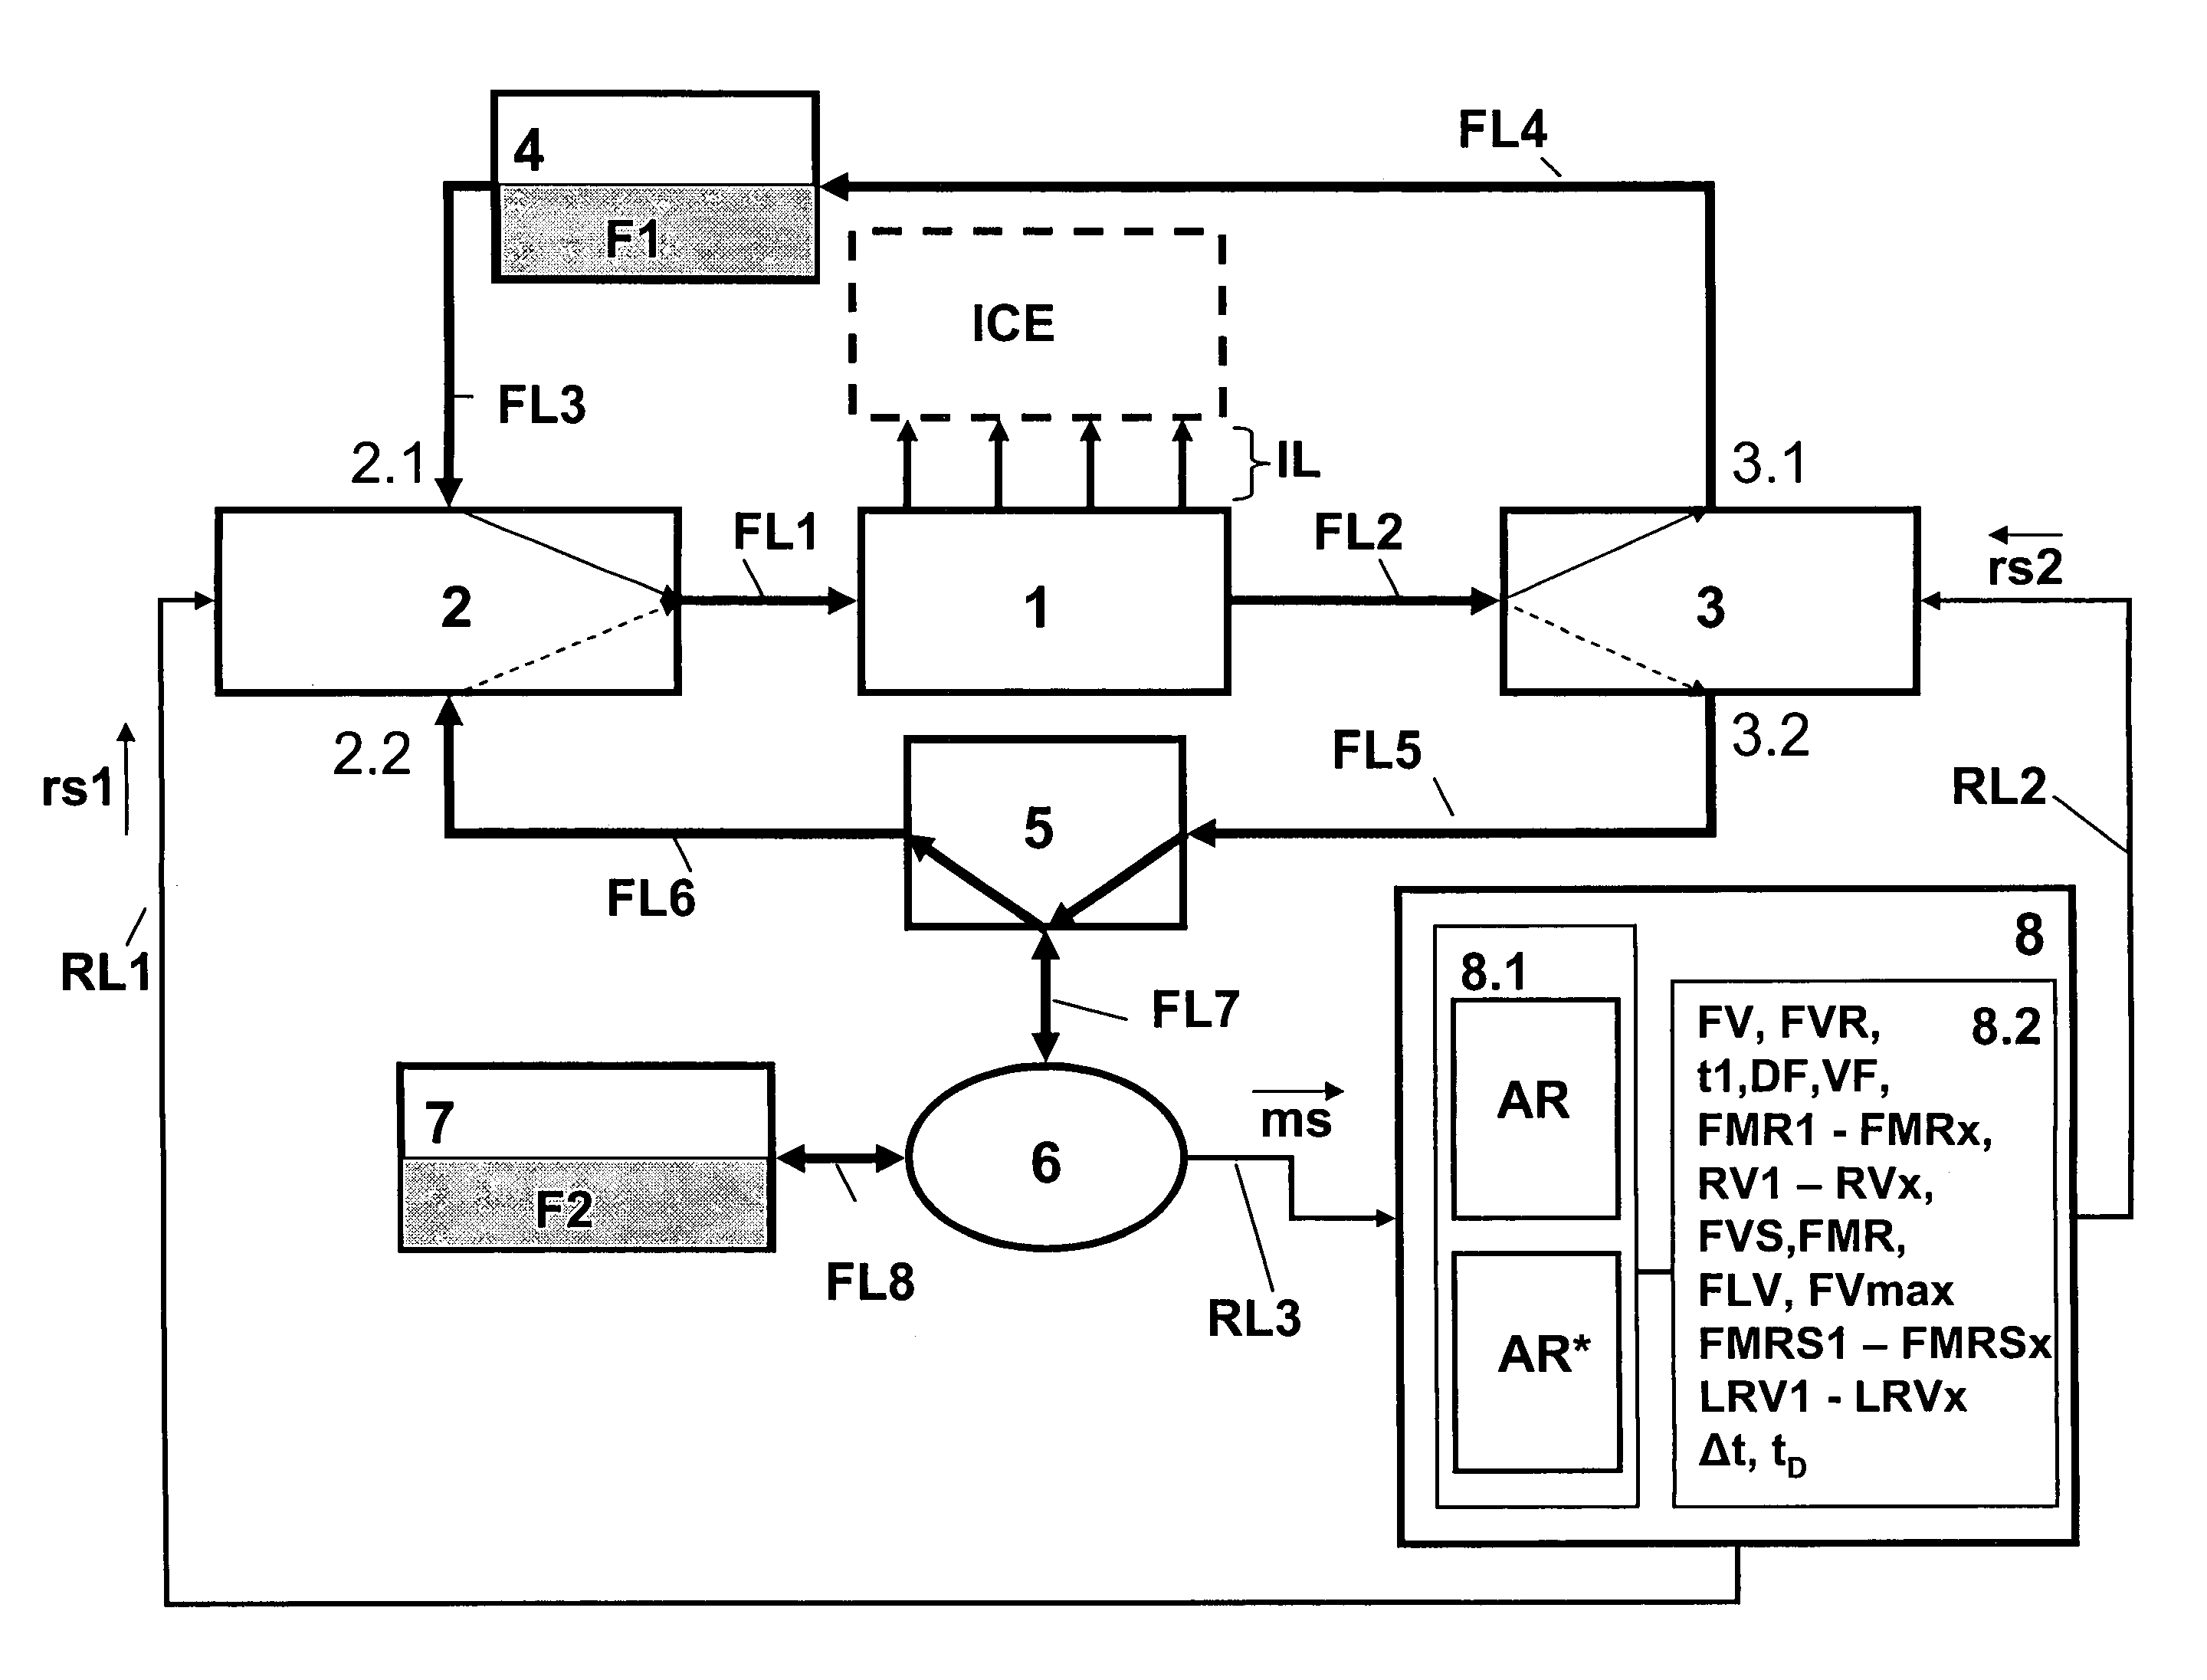 Method for verification of at least one given fuel mixture ratio